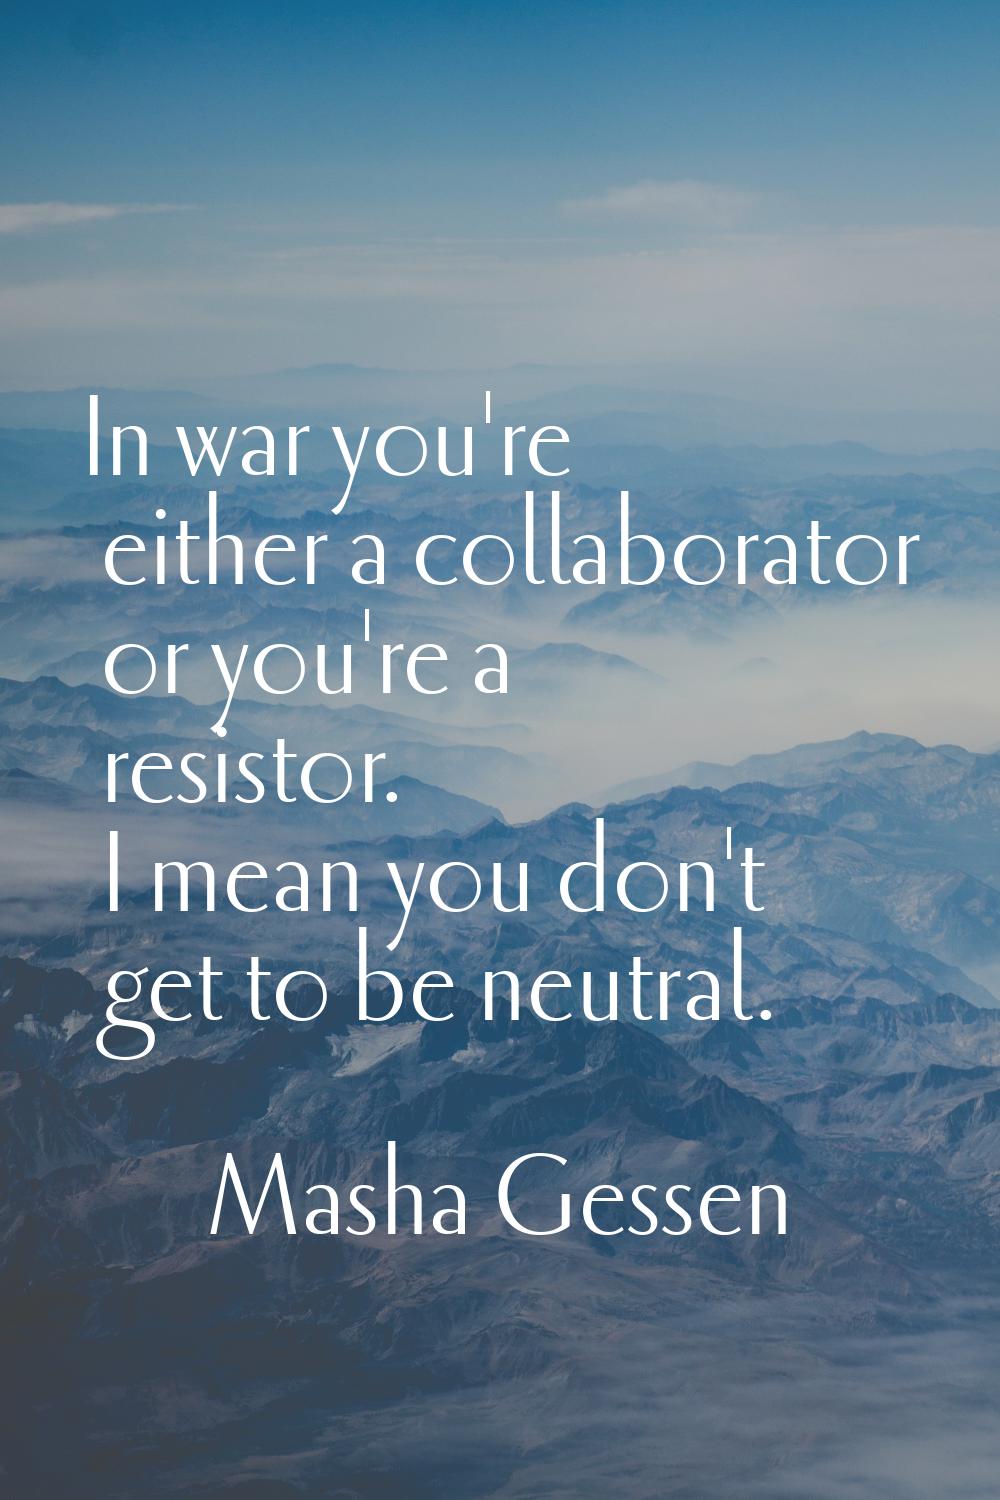 In war you're either a collaborator or you're a resistor. I mean you don't get to be neutral.